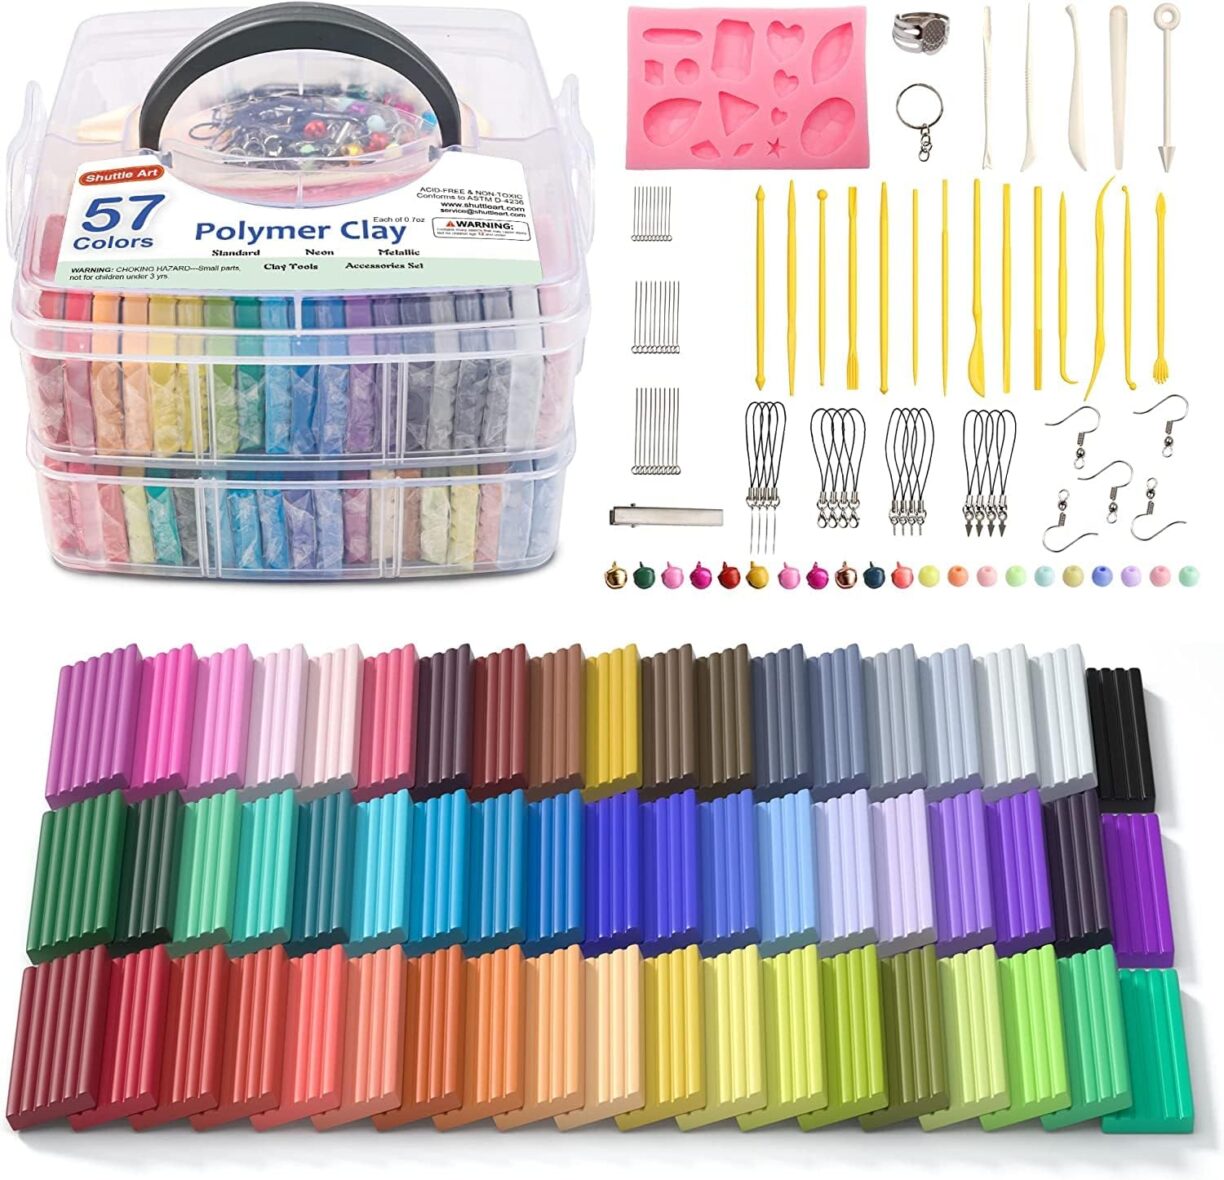 Shuttle Art Polymer Clay, Shuttle Art 57 Colors Oven Bake Modeling Clay, Creative Clay Kit with 19 Clay Tools and 10 Kinds of Accessories, Non-Toxic, Non-Sticky, Ideal DIY Art Craft Clay Gift